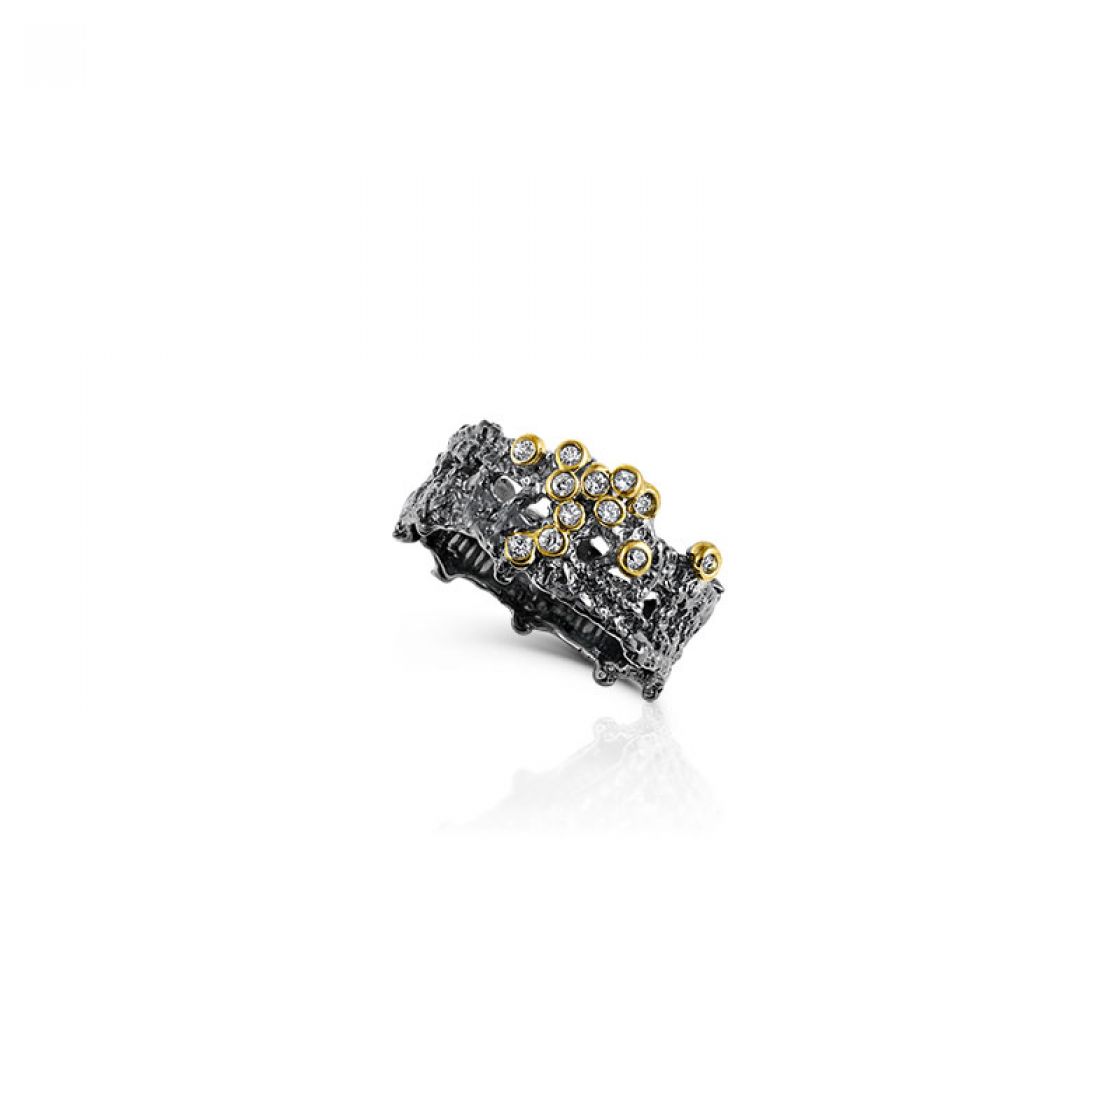 Lace textured, black plated ring with gold bezels and zircon stones.